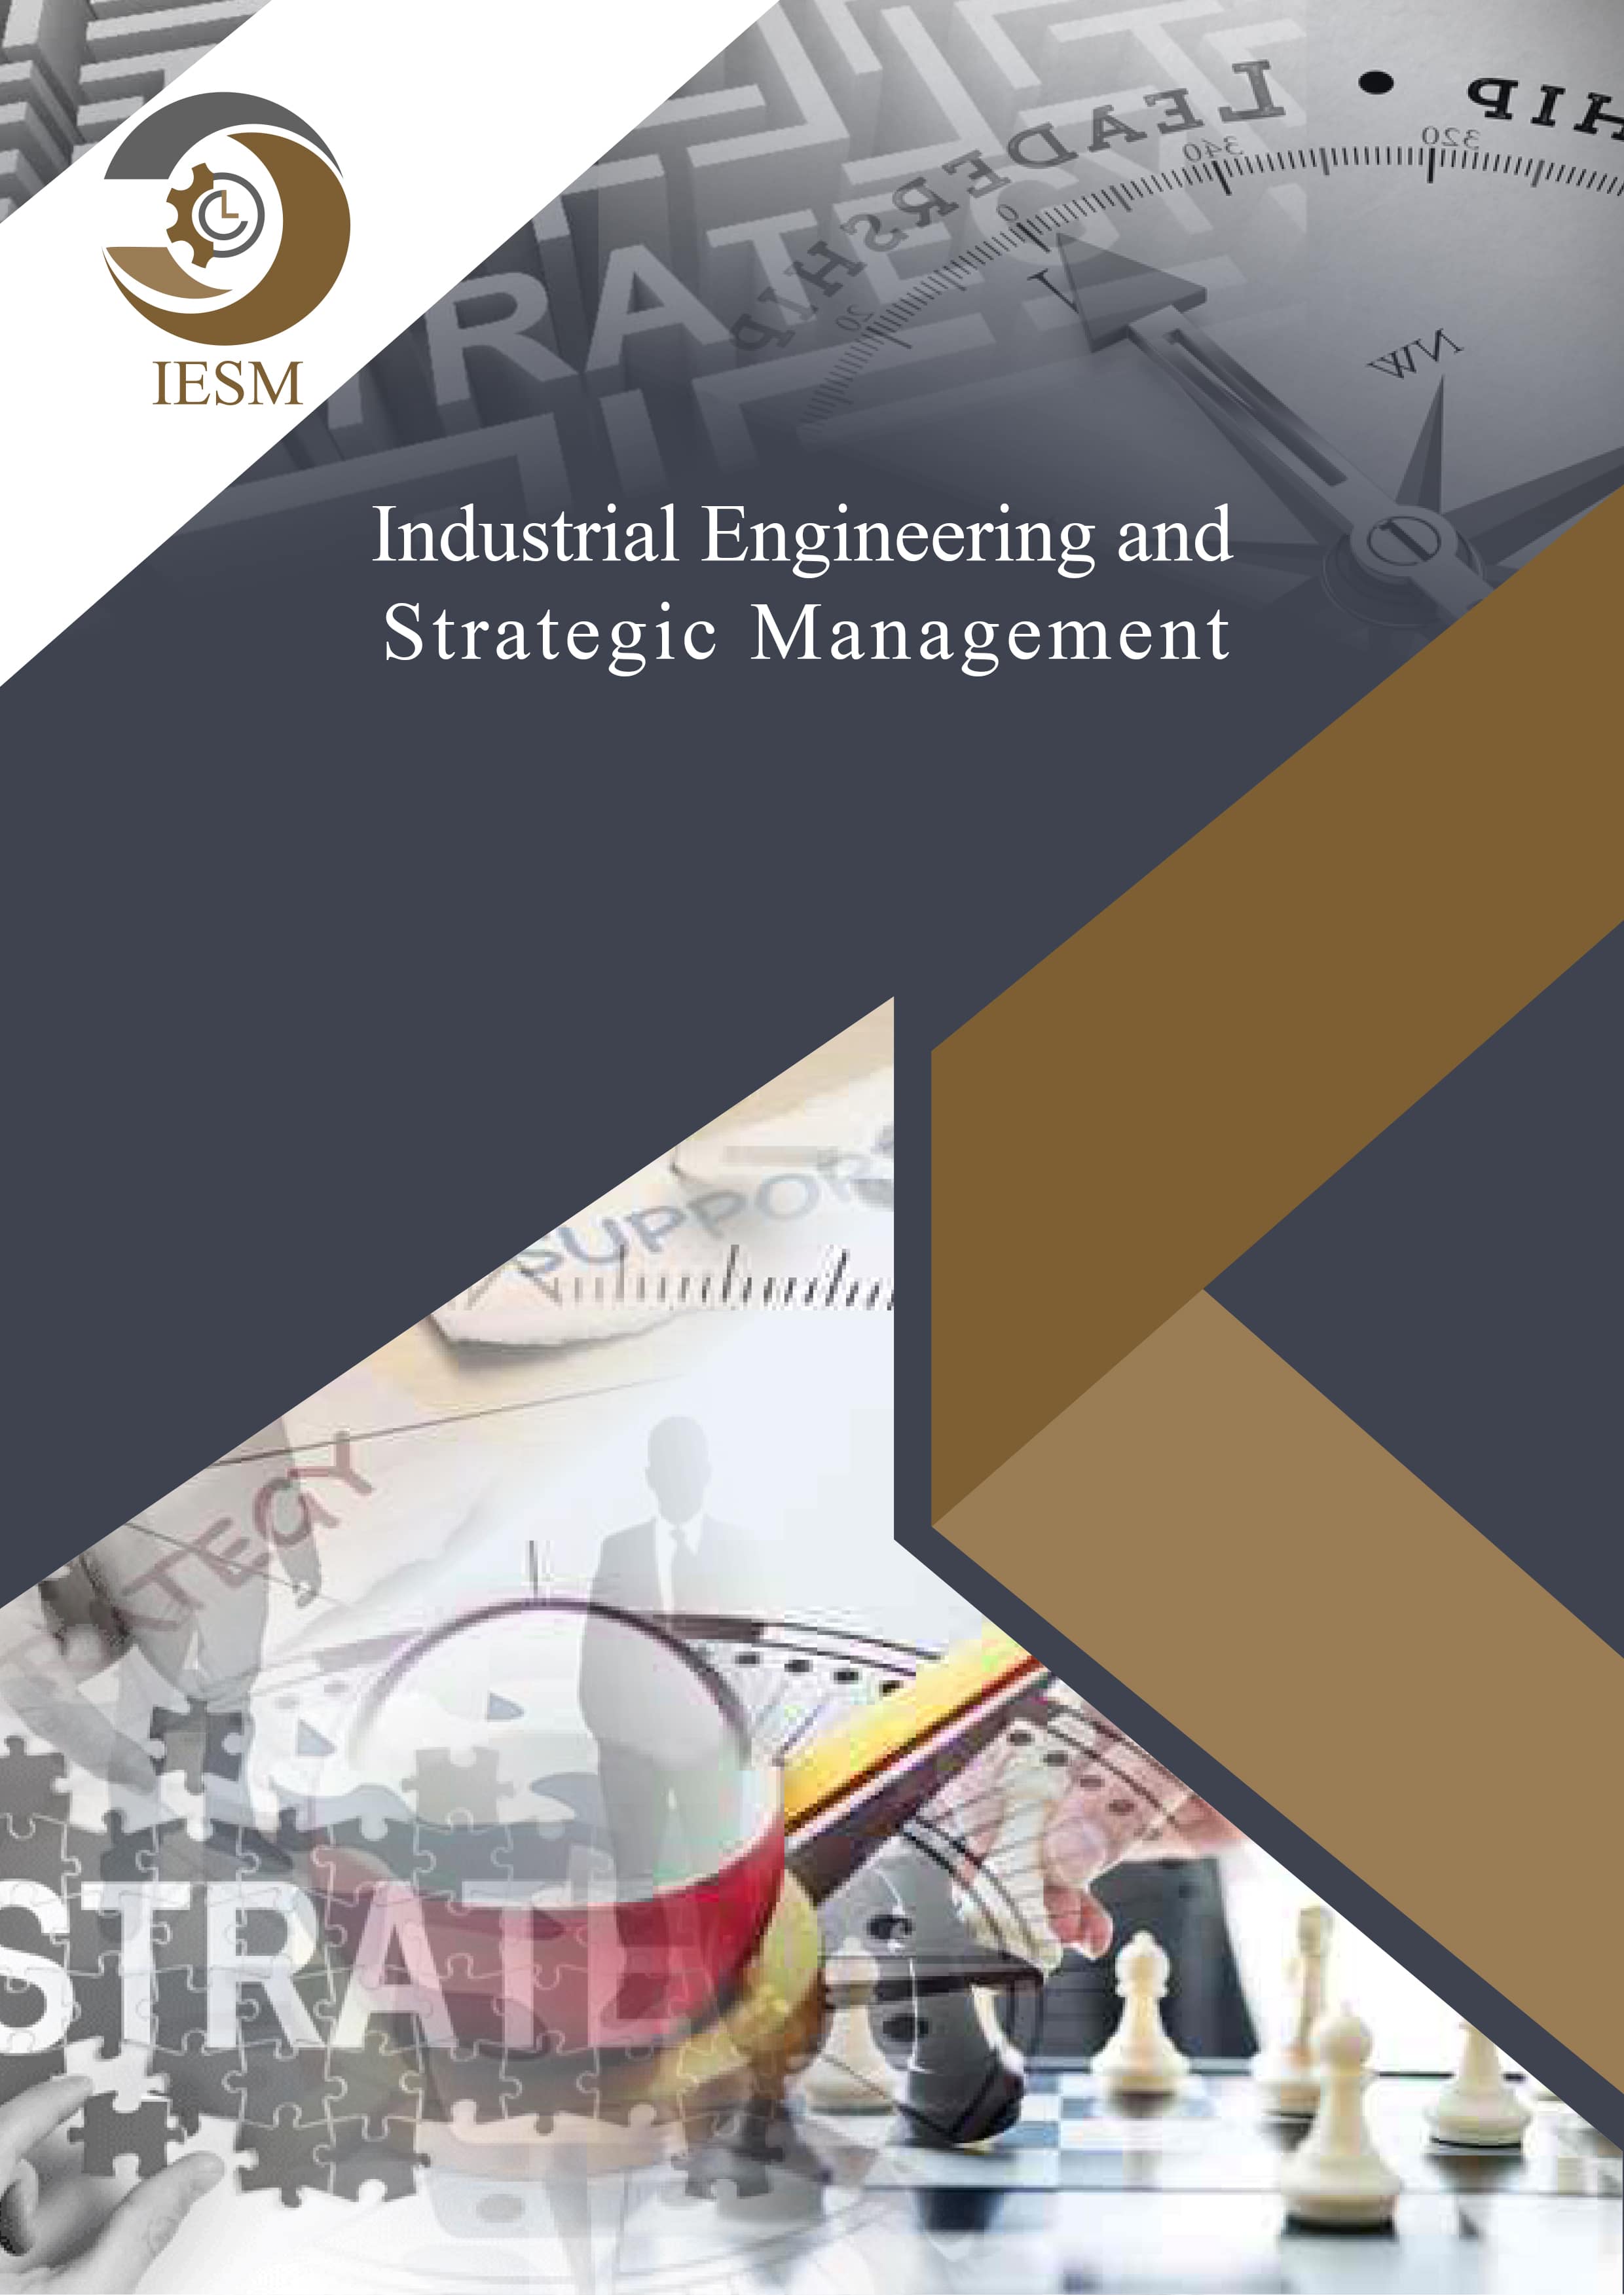 Industrial Engineering and Strategic Management